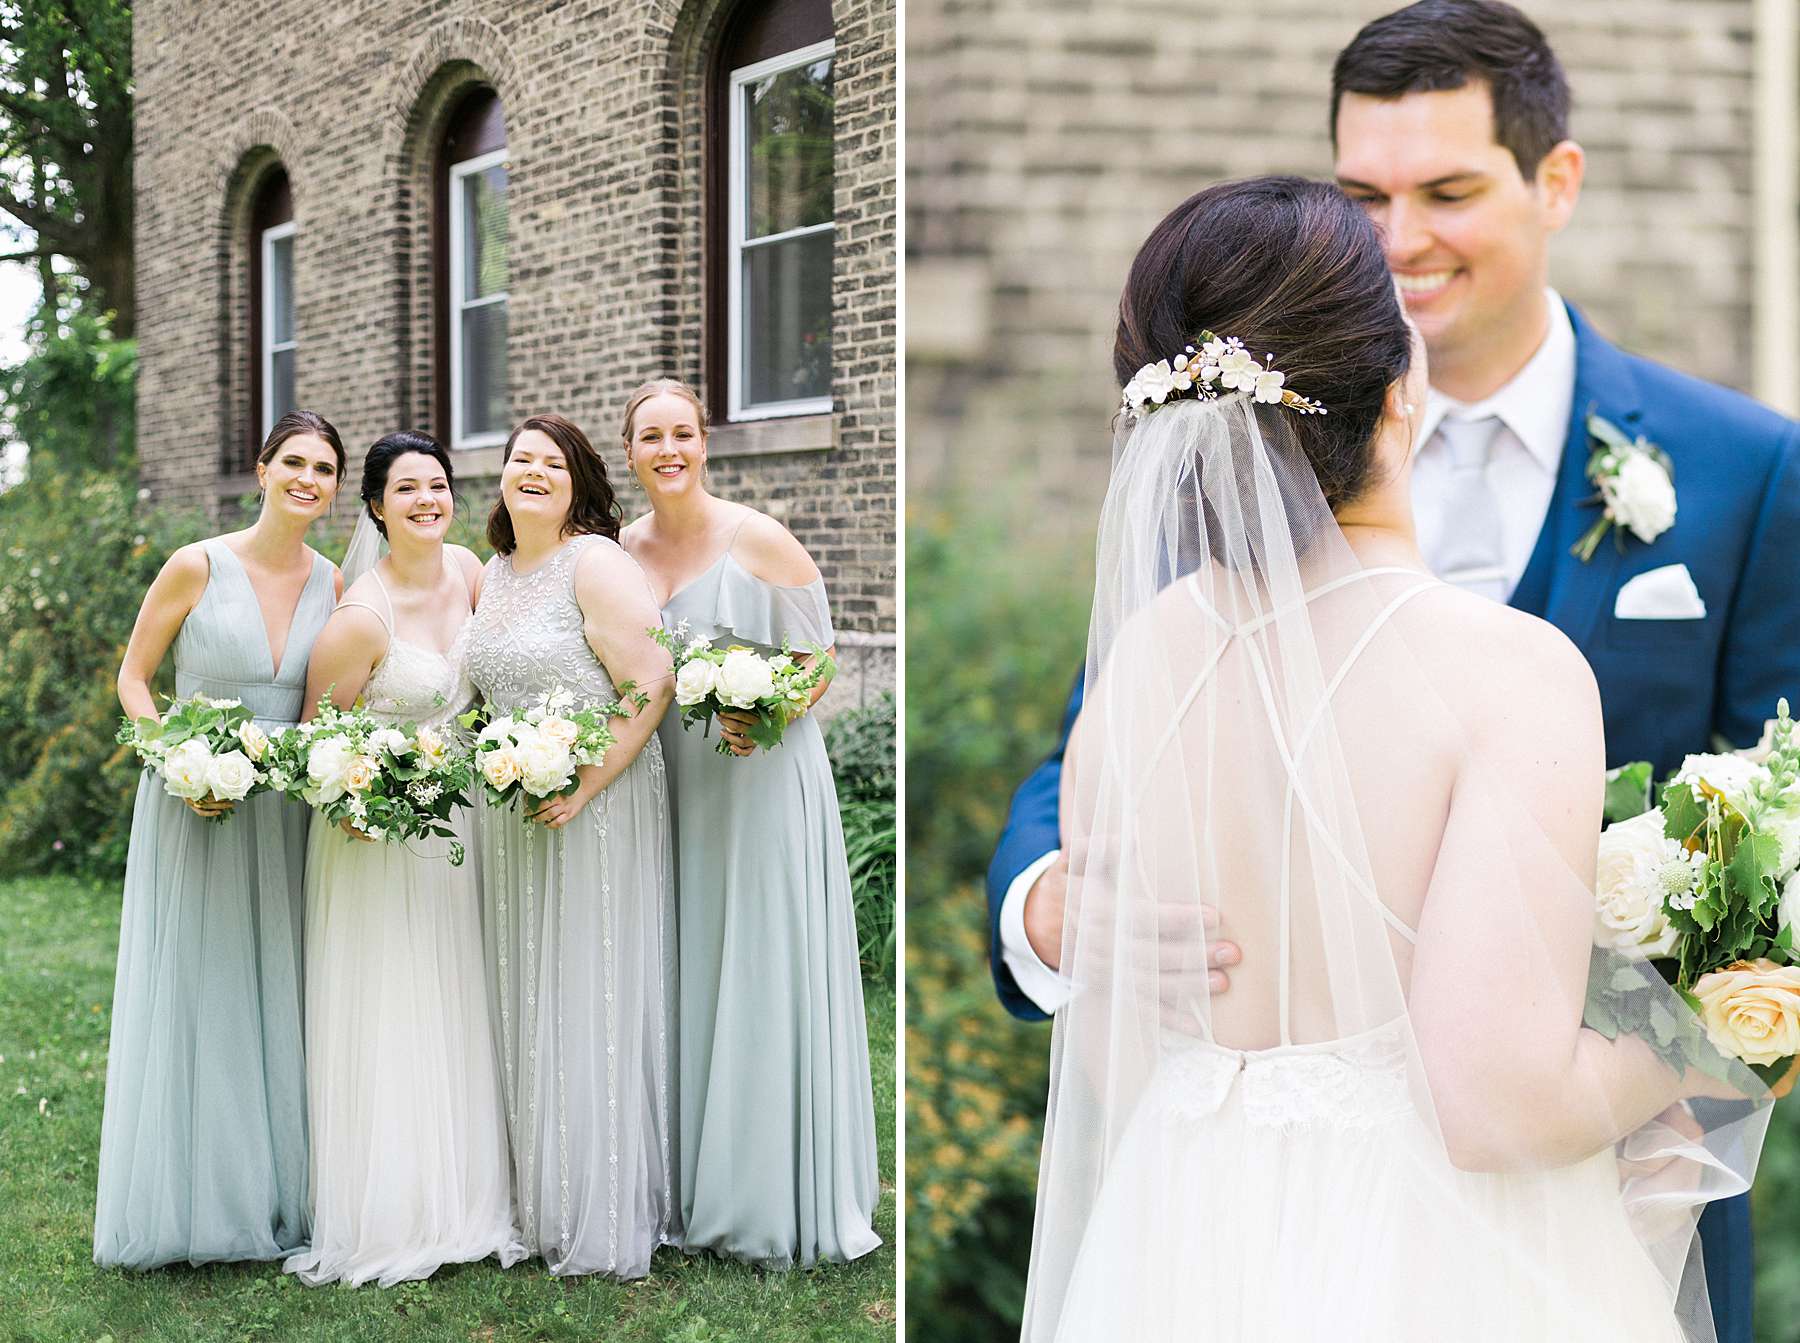 bridal party portraits, romantic wedding at turner hall ballroom downtown milwaukee with milwaukee flower company, photo by laurelyn savannah photography